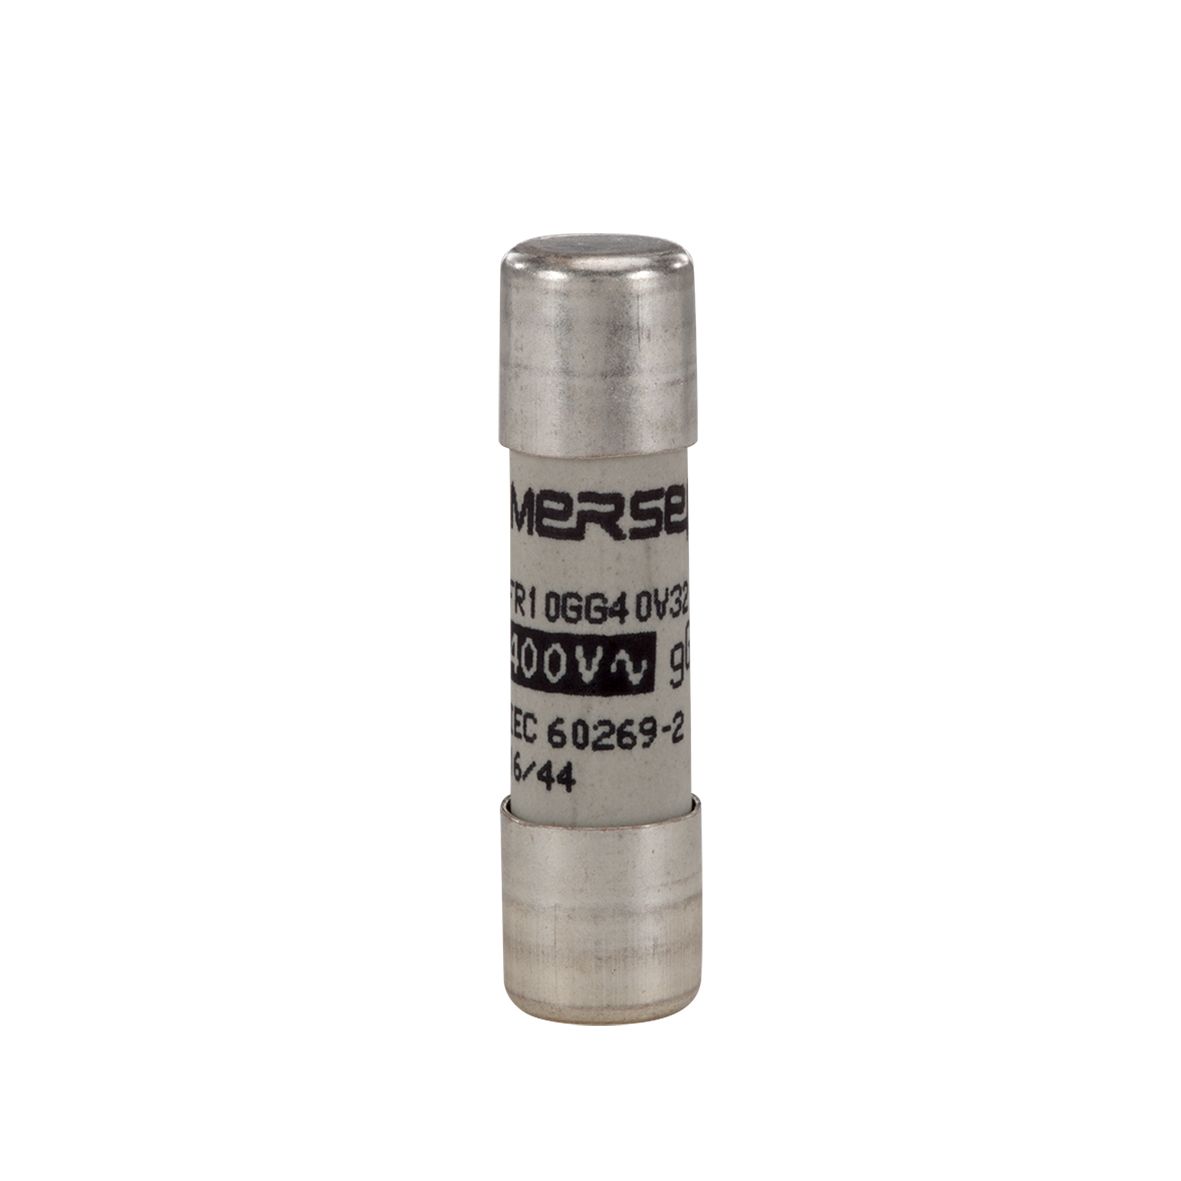 A214107 - Cylindrical fuse-link gG 400VAC 10.3x38, 32A